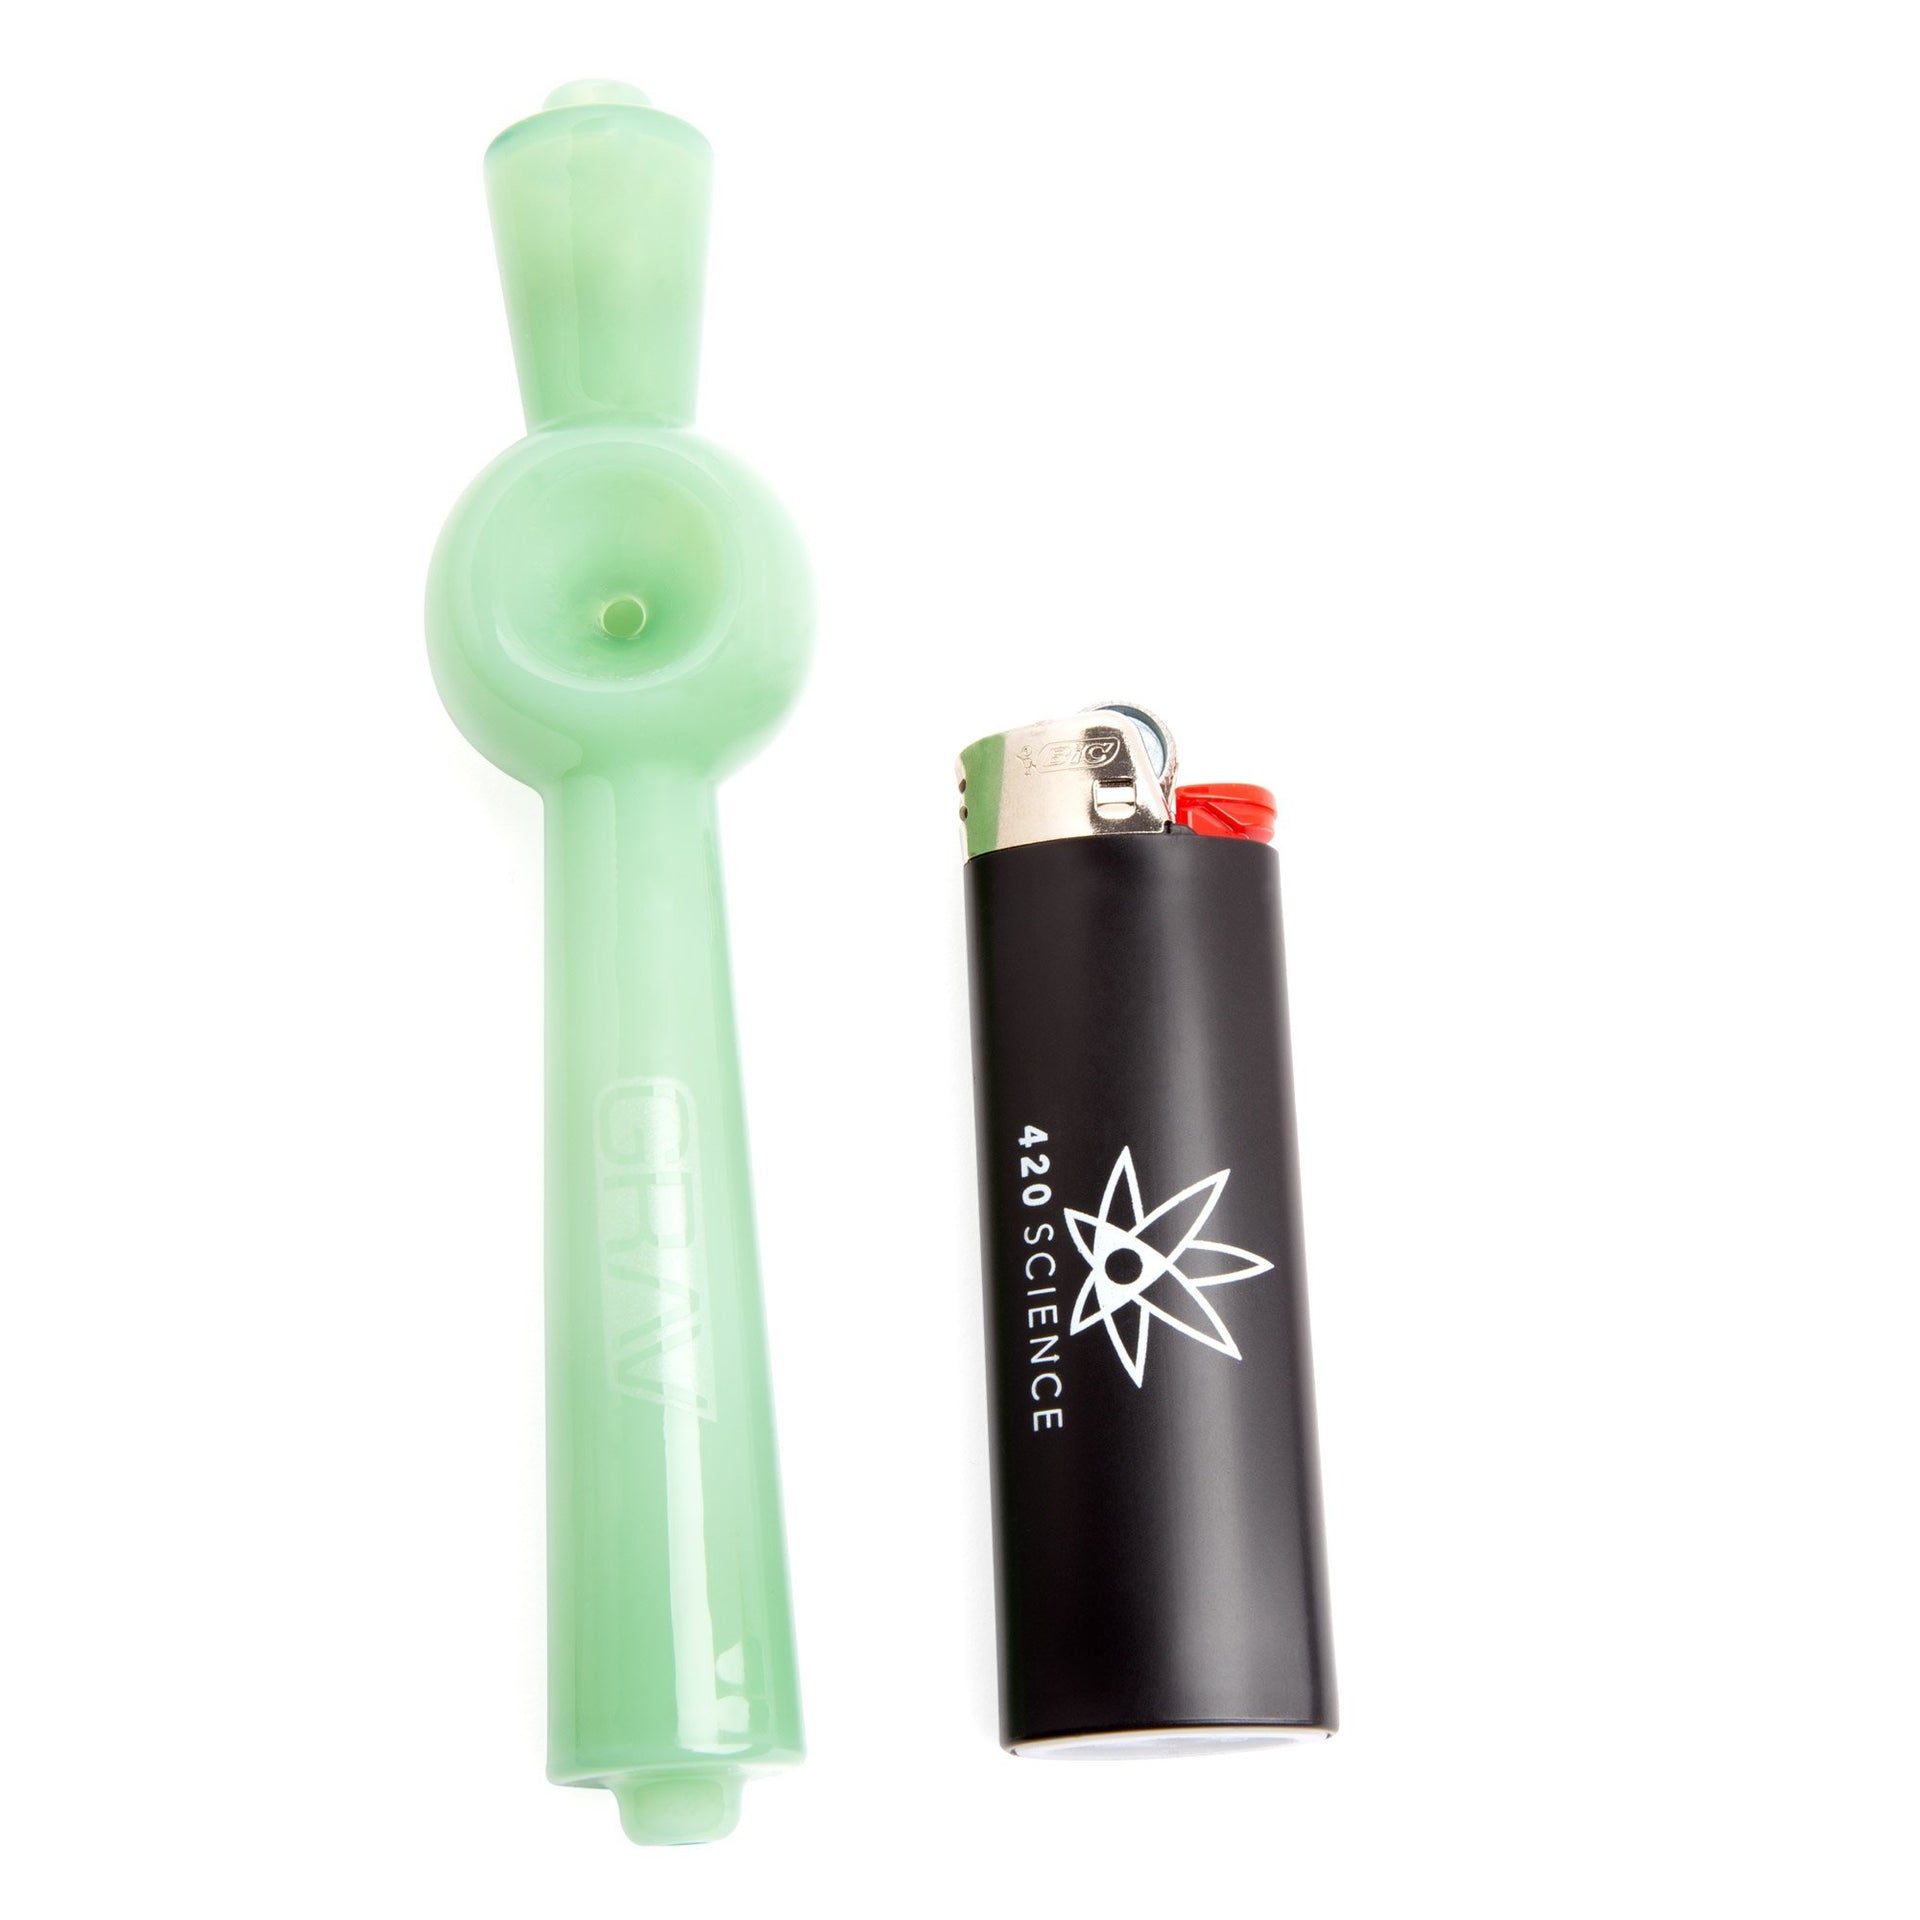 GRAV Deco Steamroller - 420 Science - The most trusted online smoke shop.